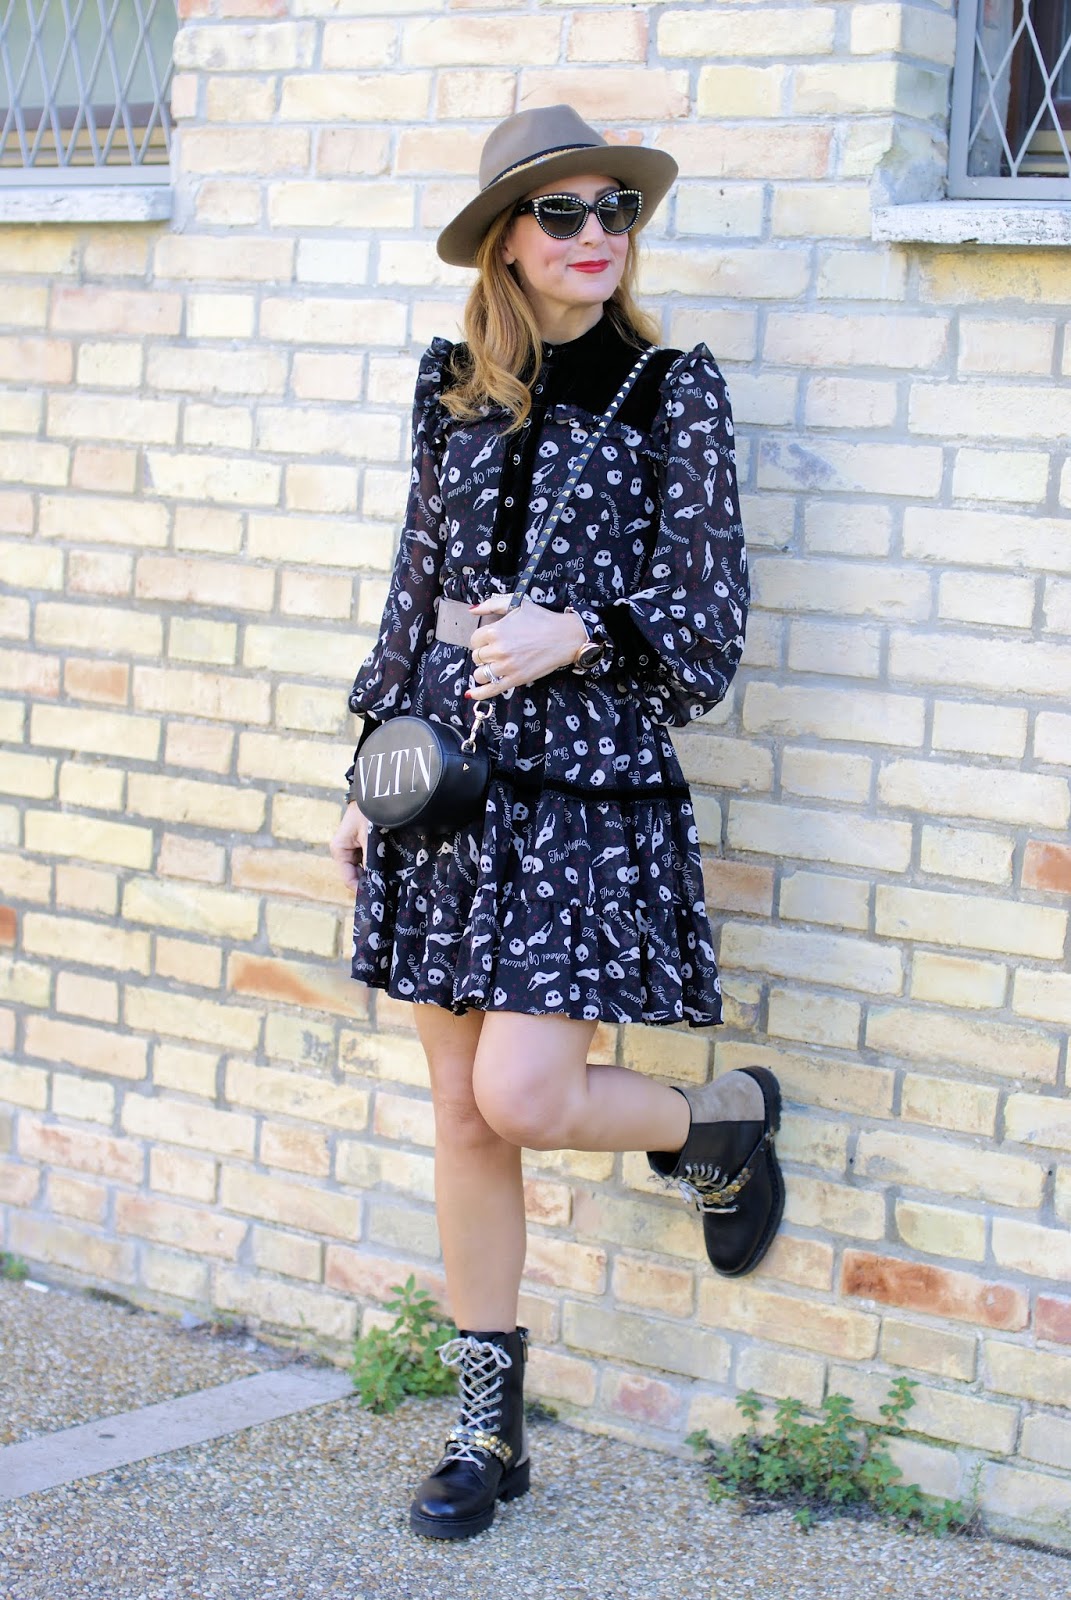 Maggie Sweet dress, Barracuda boots on Fashion and Cookies fashion blog, fashion blogger style